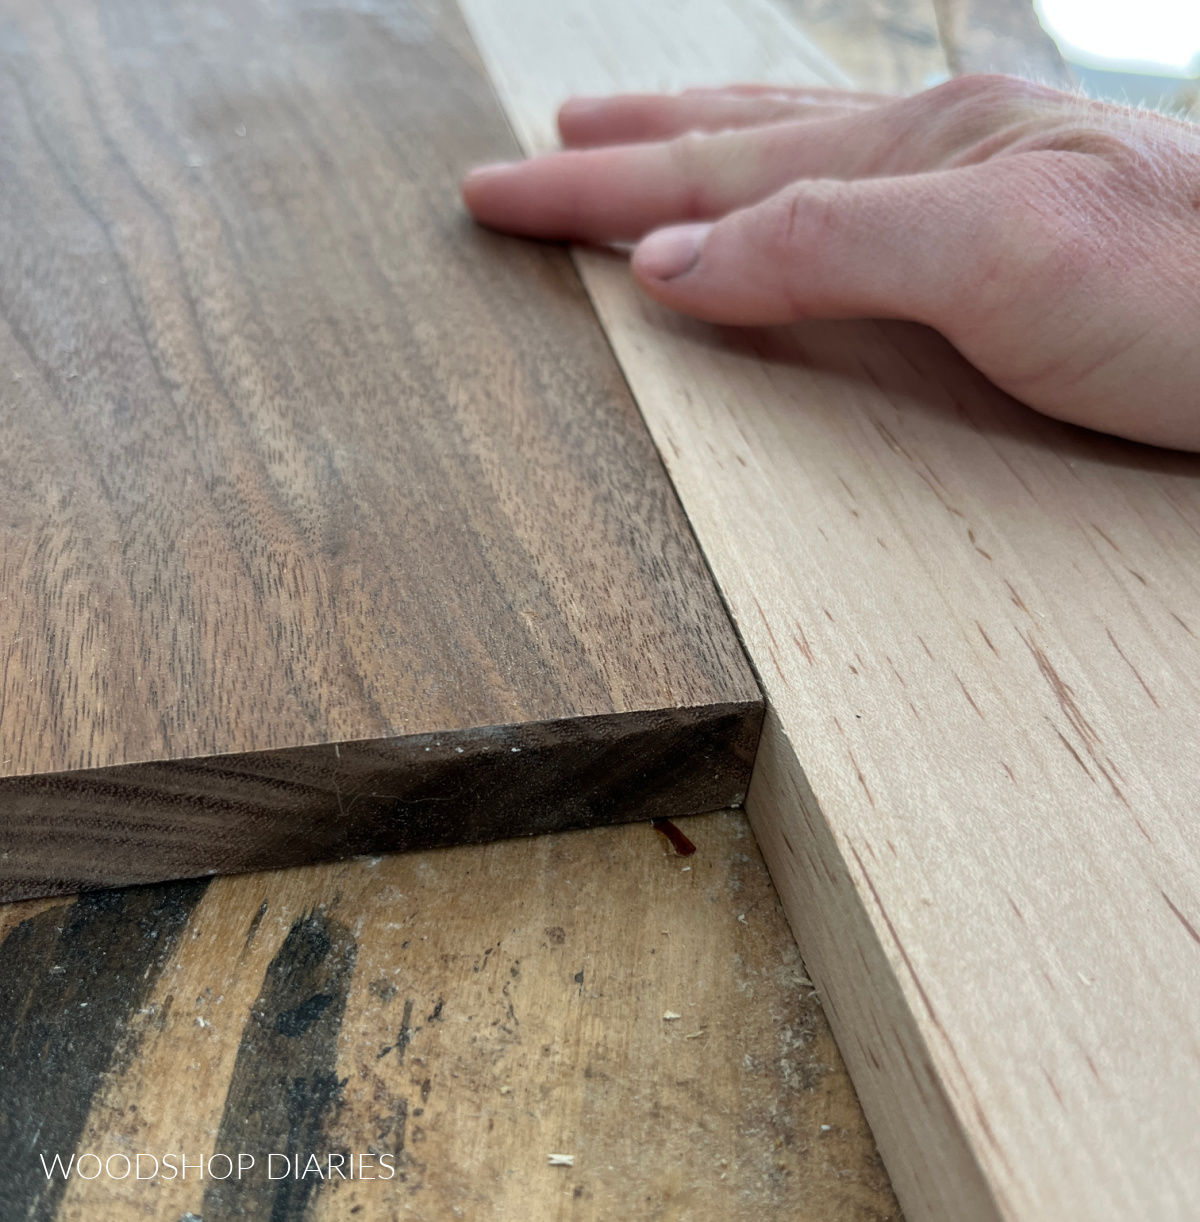 Maple and walnut boards laying side by side on workbench showing they're the same thickness